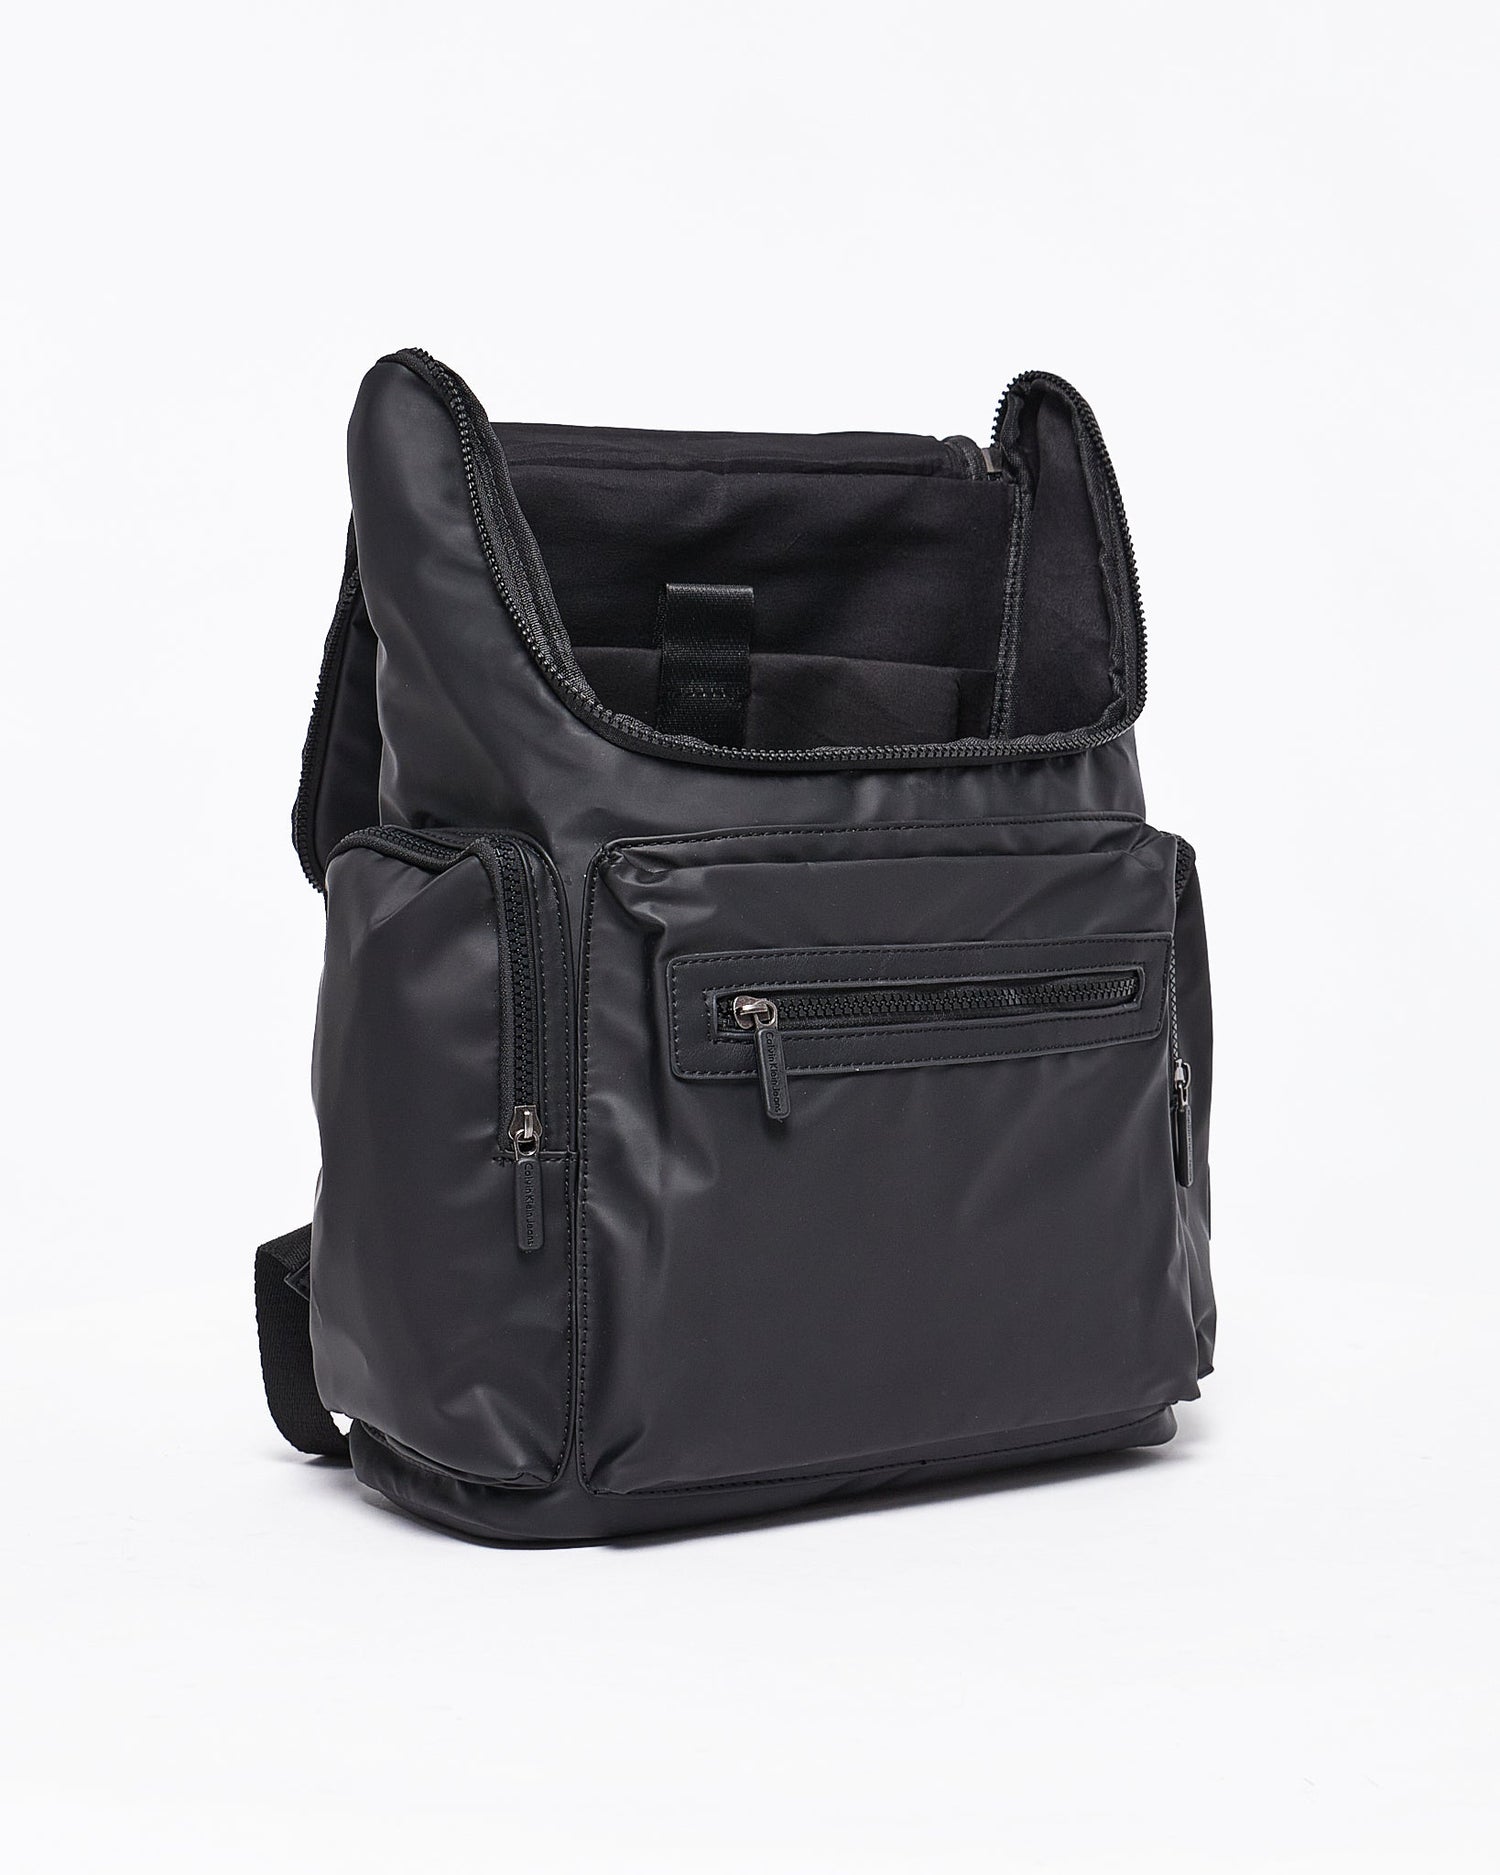 MOI OUTFIT-CK Men Backpack 35.90